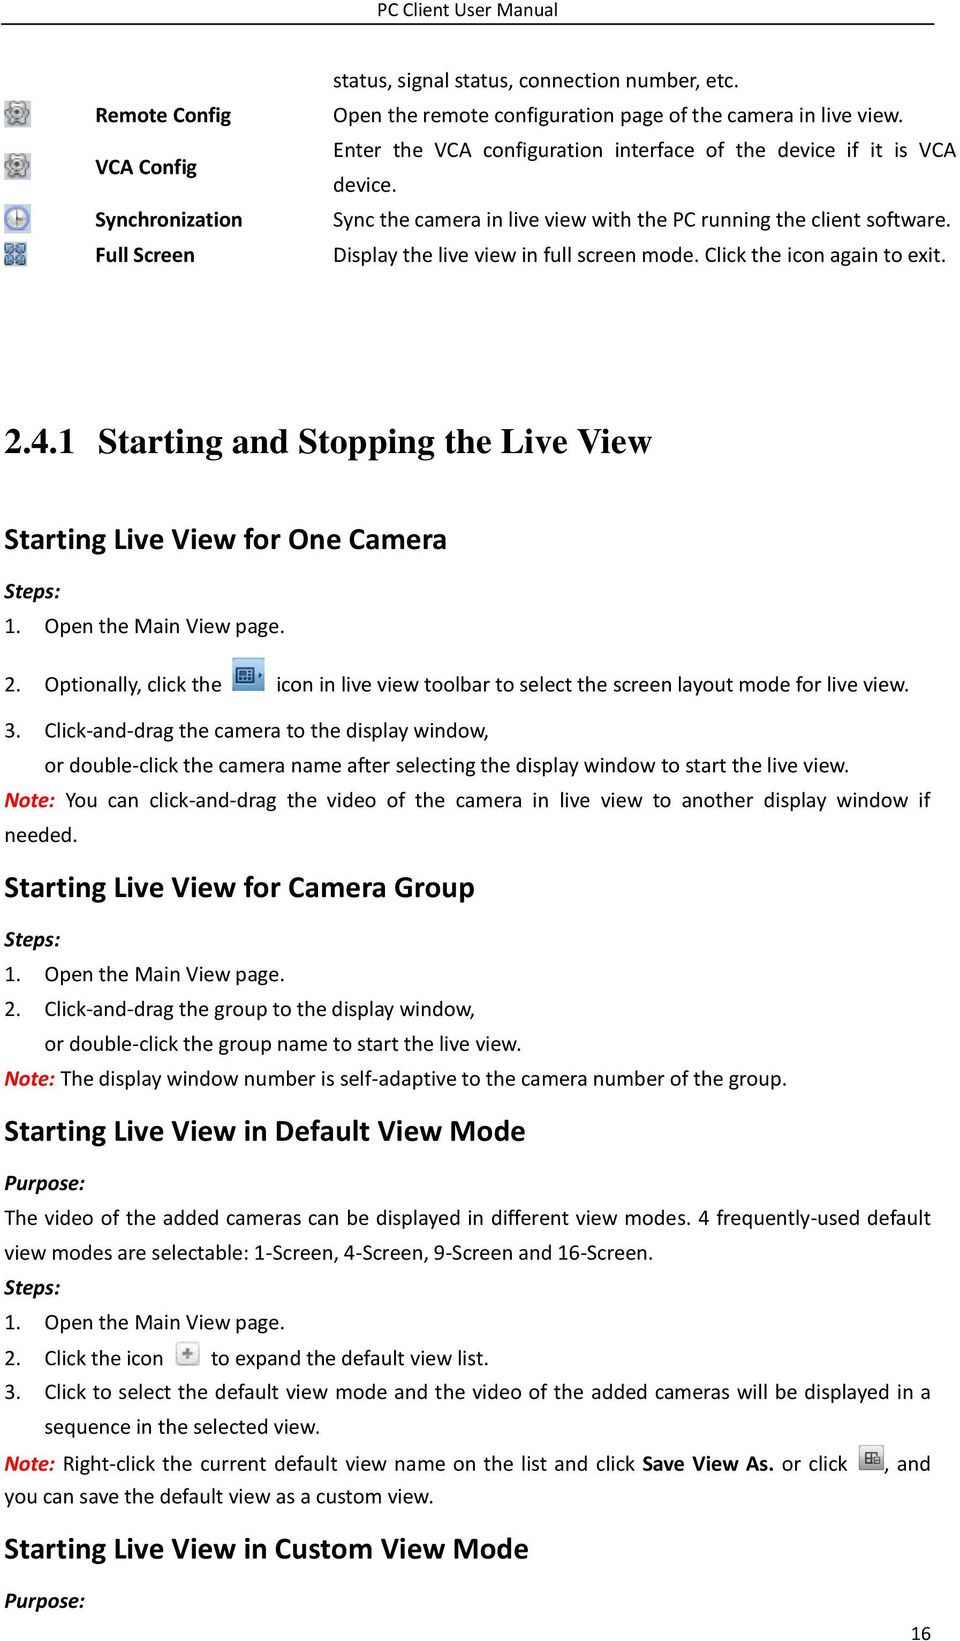 Click the icon again to exit. 2.4.1 Starting and Stopping the Live View Starting Live View for One Camera 1. Open the Main View page. 2. Optionally, click the icon in live view toolbar to select the screen layout mode for live view.